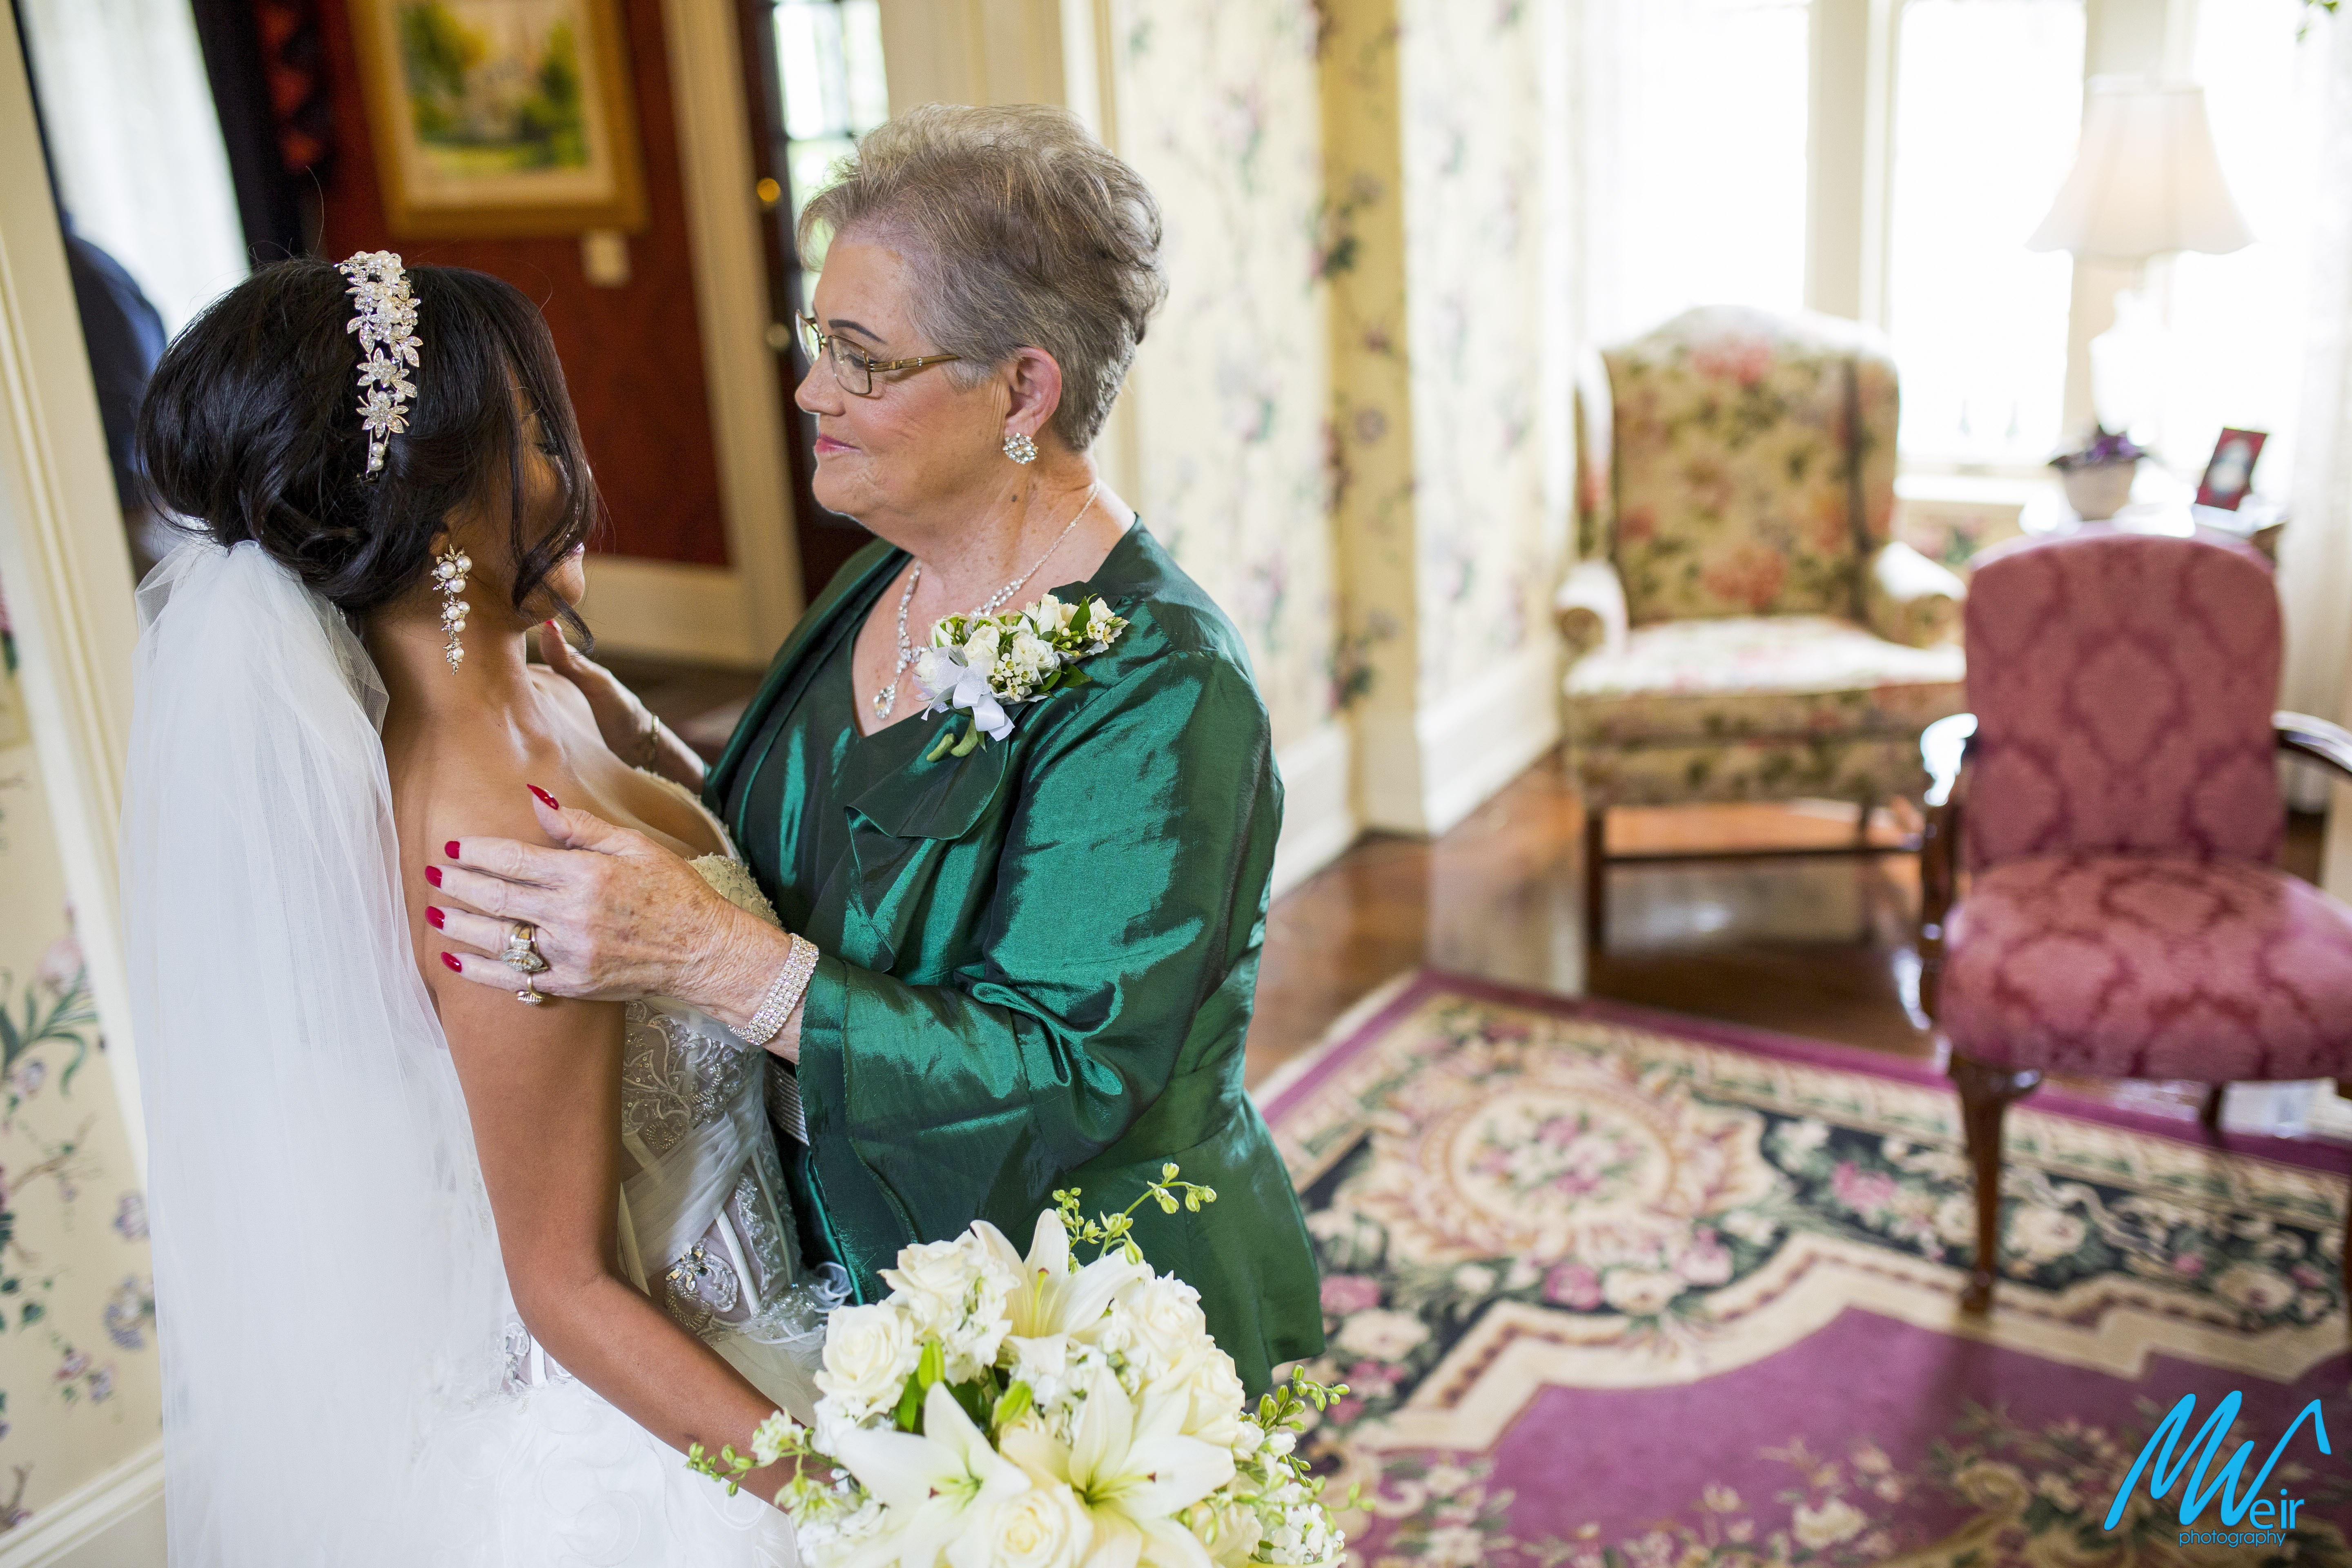 mother of the groom embraces bride in the foyer of wedding hall